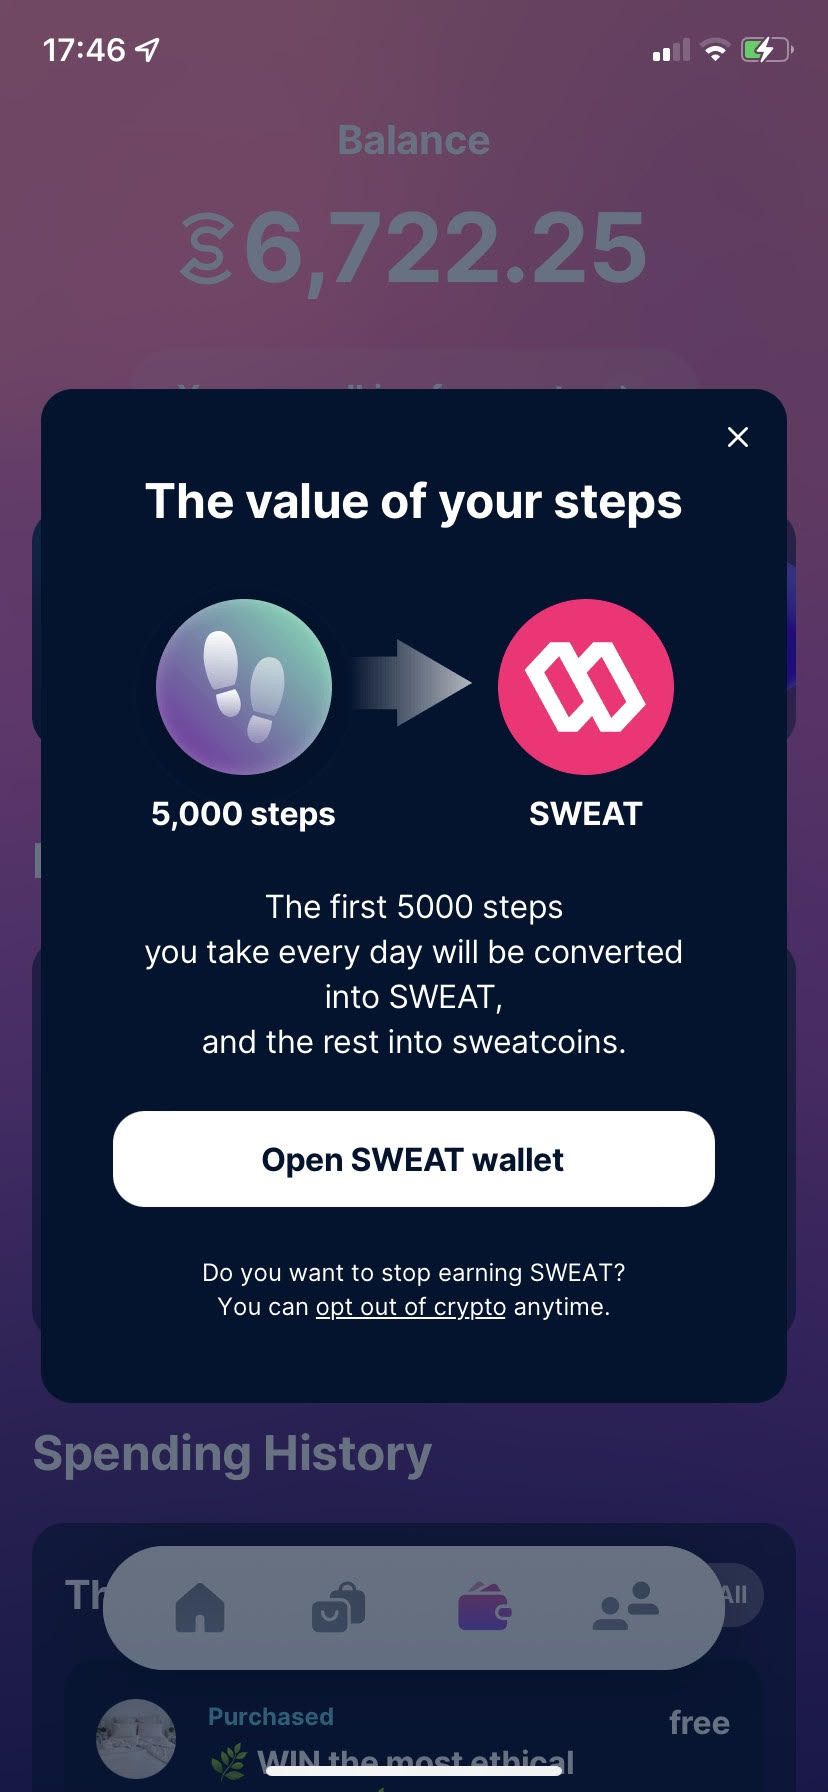 The value of your steps converted to Sweat